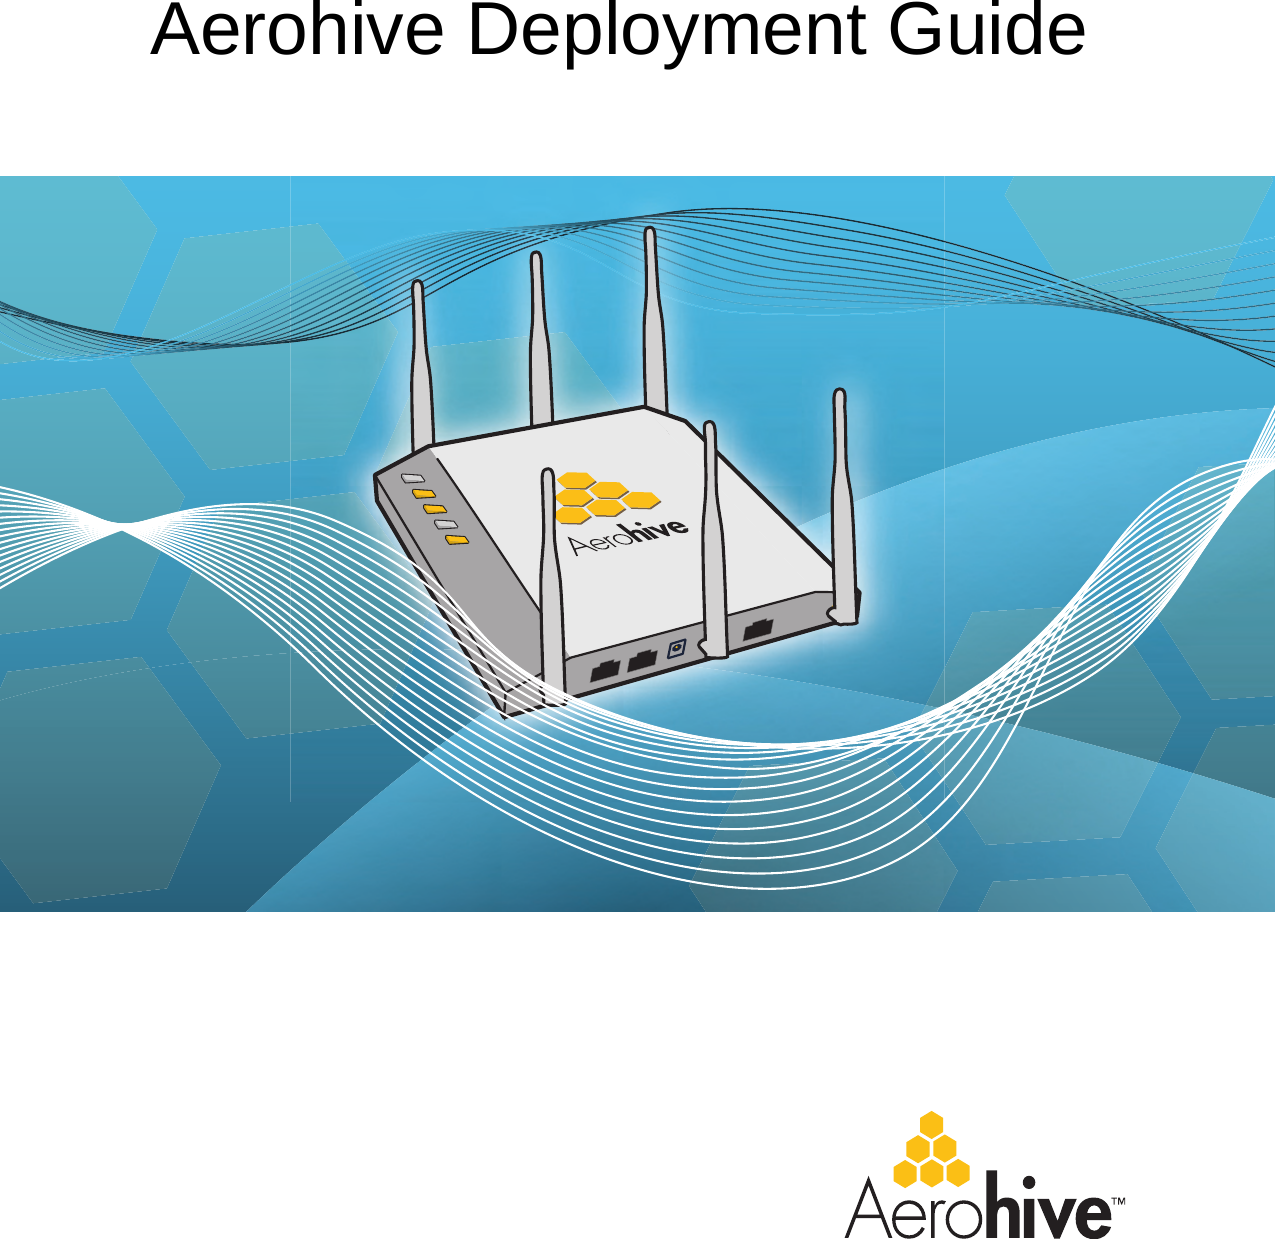 Aerohive Deployment Guide